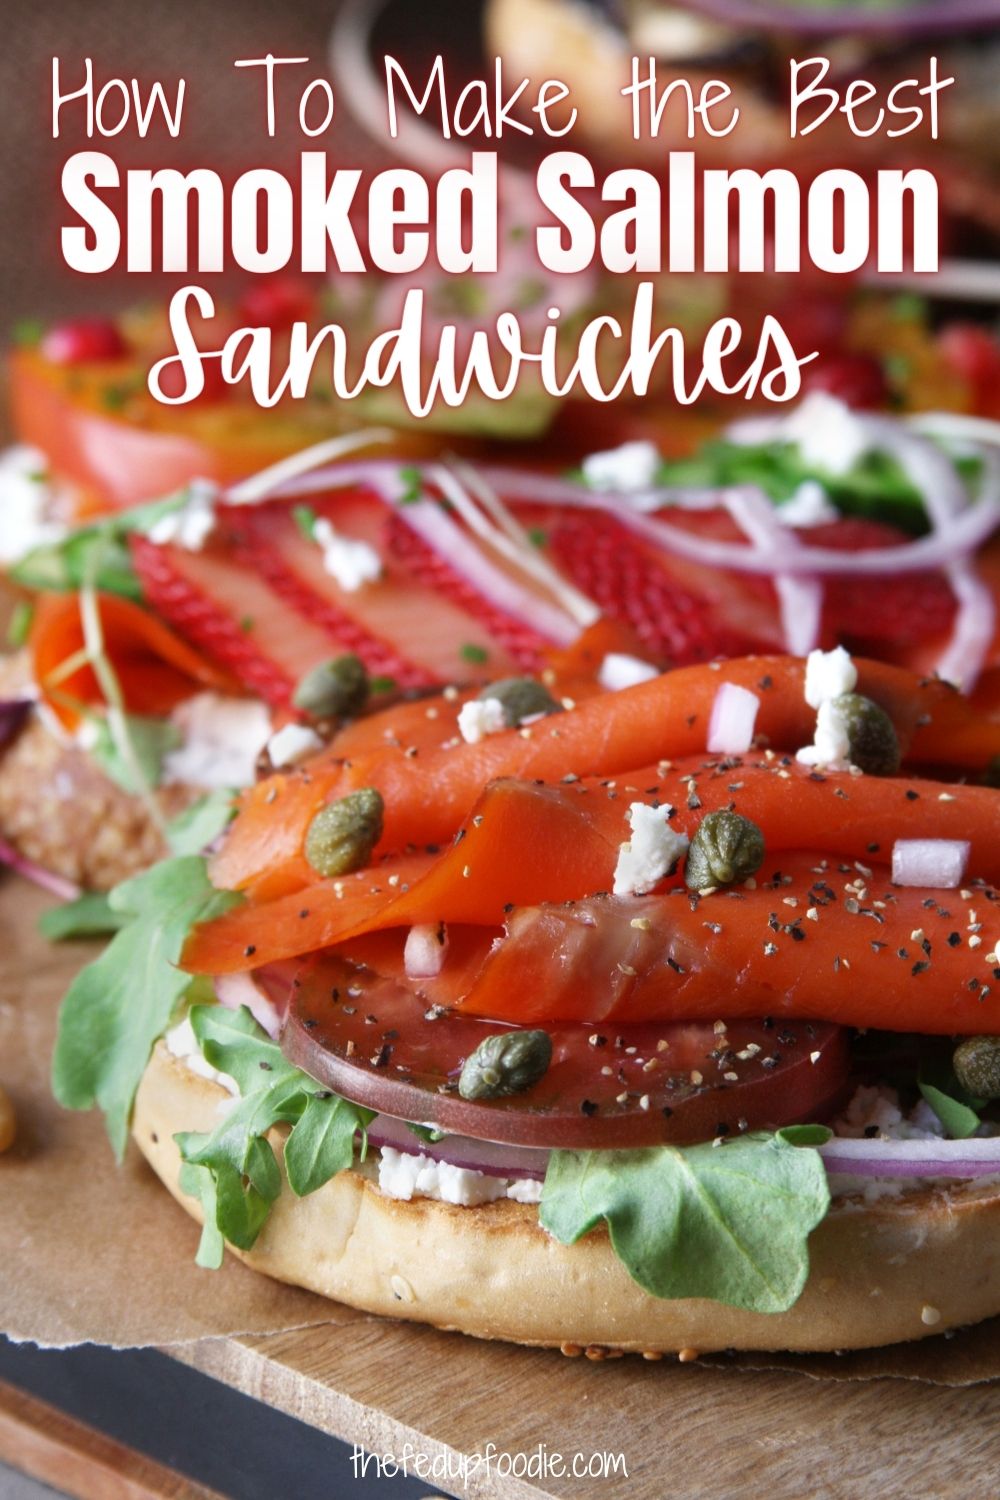 Smoked Salmon Sandwiches (or Lox Sandwiches) are an easy and healthy all-purpose meal great for anytime of year, but especially wonderful for when it is too hot to cook. These sandwiches are gourmet enough for special brunches and are simple enough for a quick lunch or dinner.
#LoxAndBagels #LoxSandwich #SandwichIdeasForLunch #SandwichIdeasForDinner #SmokedSalmonRecipes #SmokedSalmonSandwich #SandwichIdeas